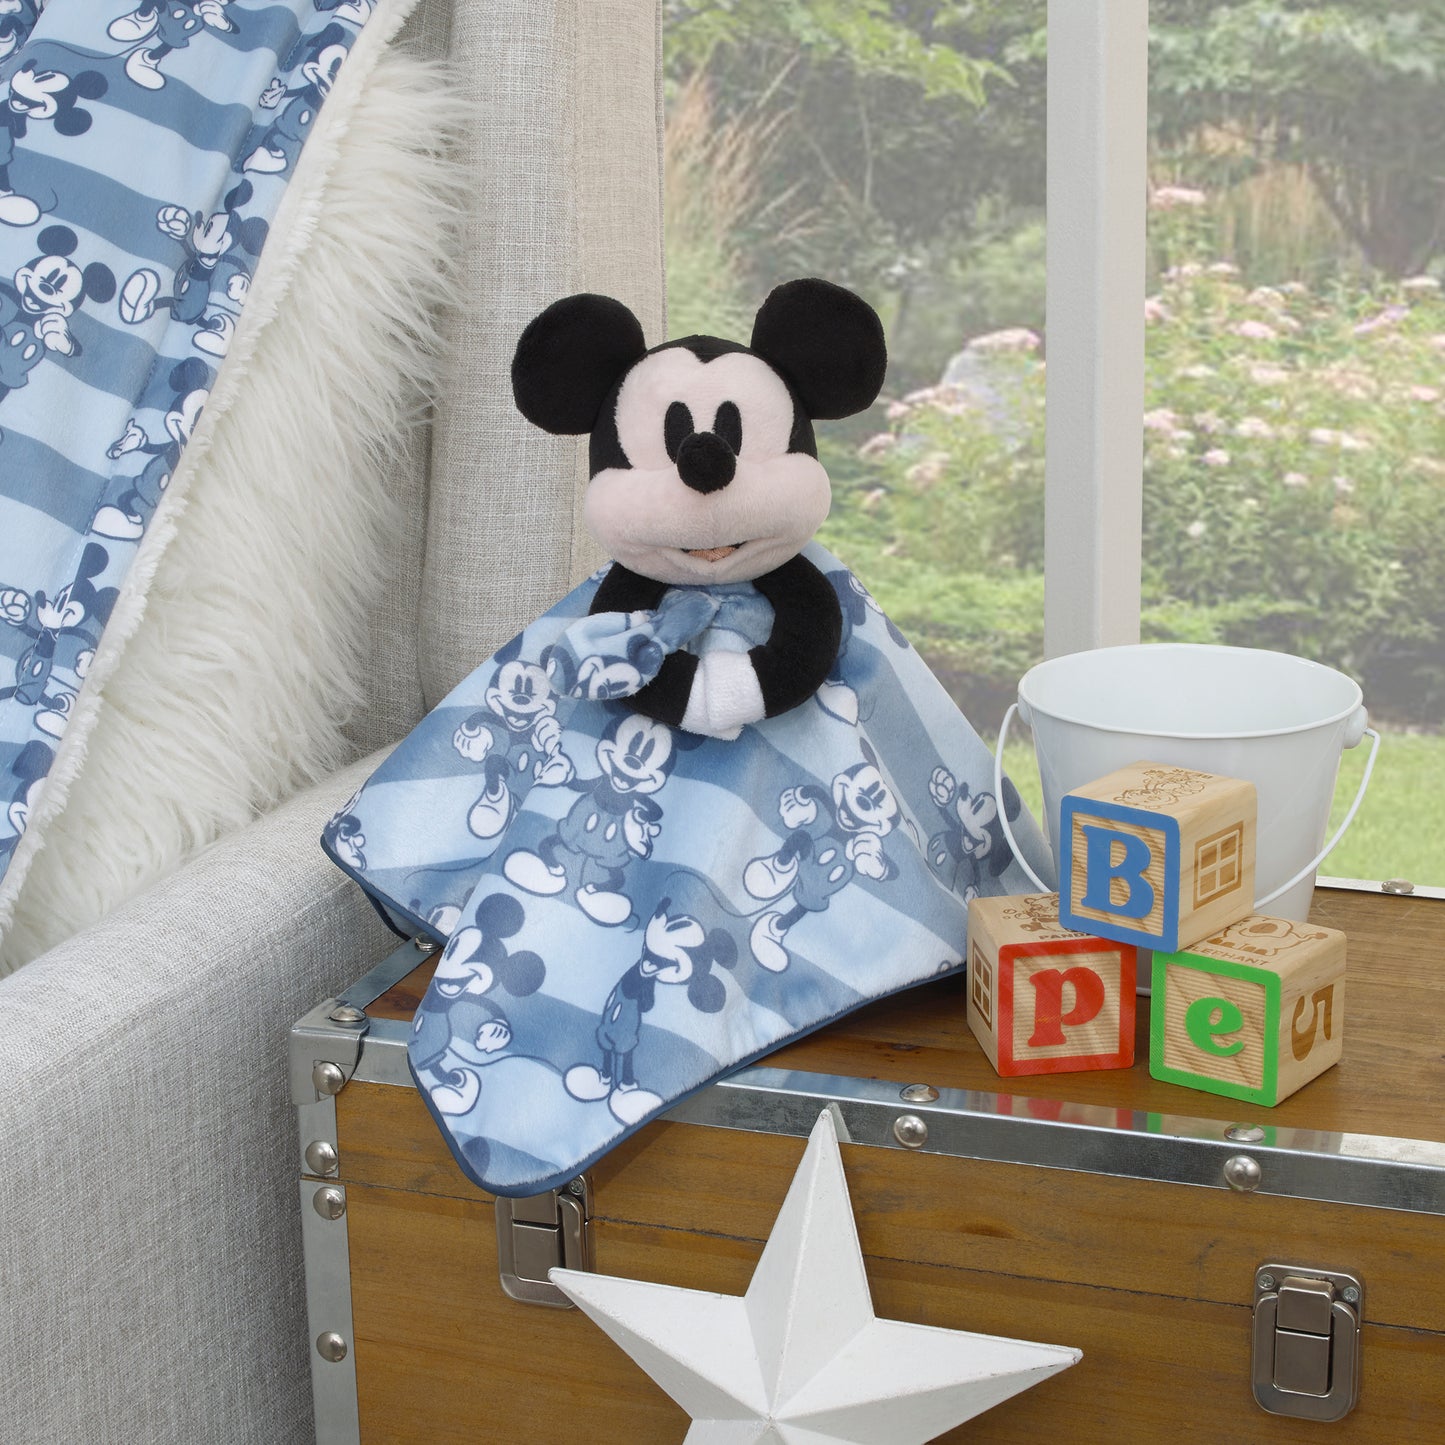 Disney Mickey Mouse Blue, White and Black Lovey Security Blanket